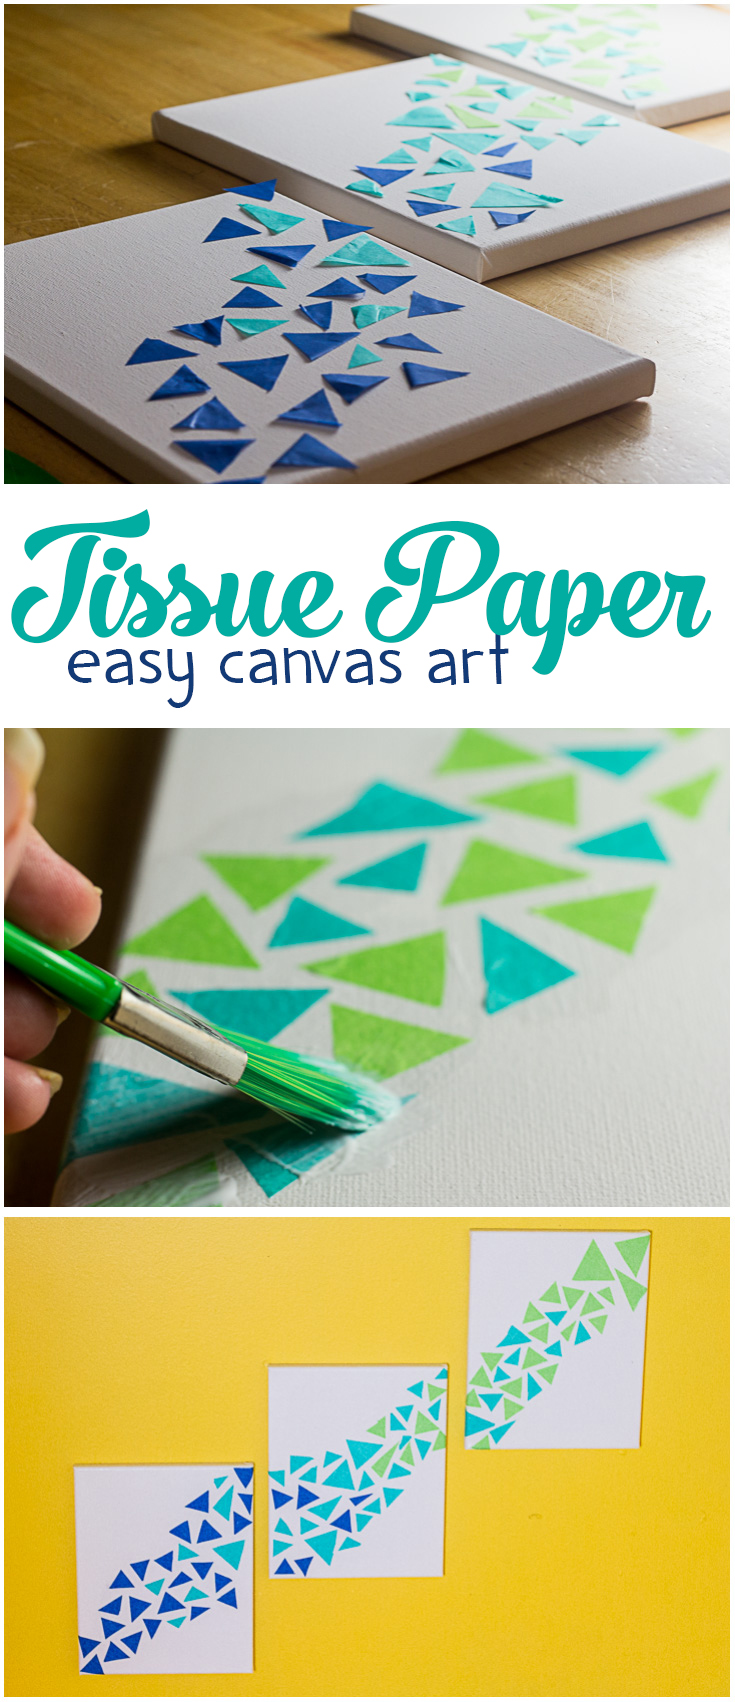 This tissue paper canvas art is so easy! Looking for the perfect mermaid scale artwork or easy craft project for you or your teen? This one takes less than an hour to make, is beautiful, and even makes a perfect gift! | DIY canvas art | tissue paper craft | easy craft for adults | easy teen craft |